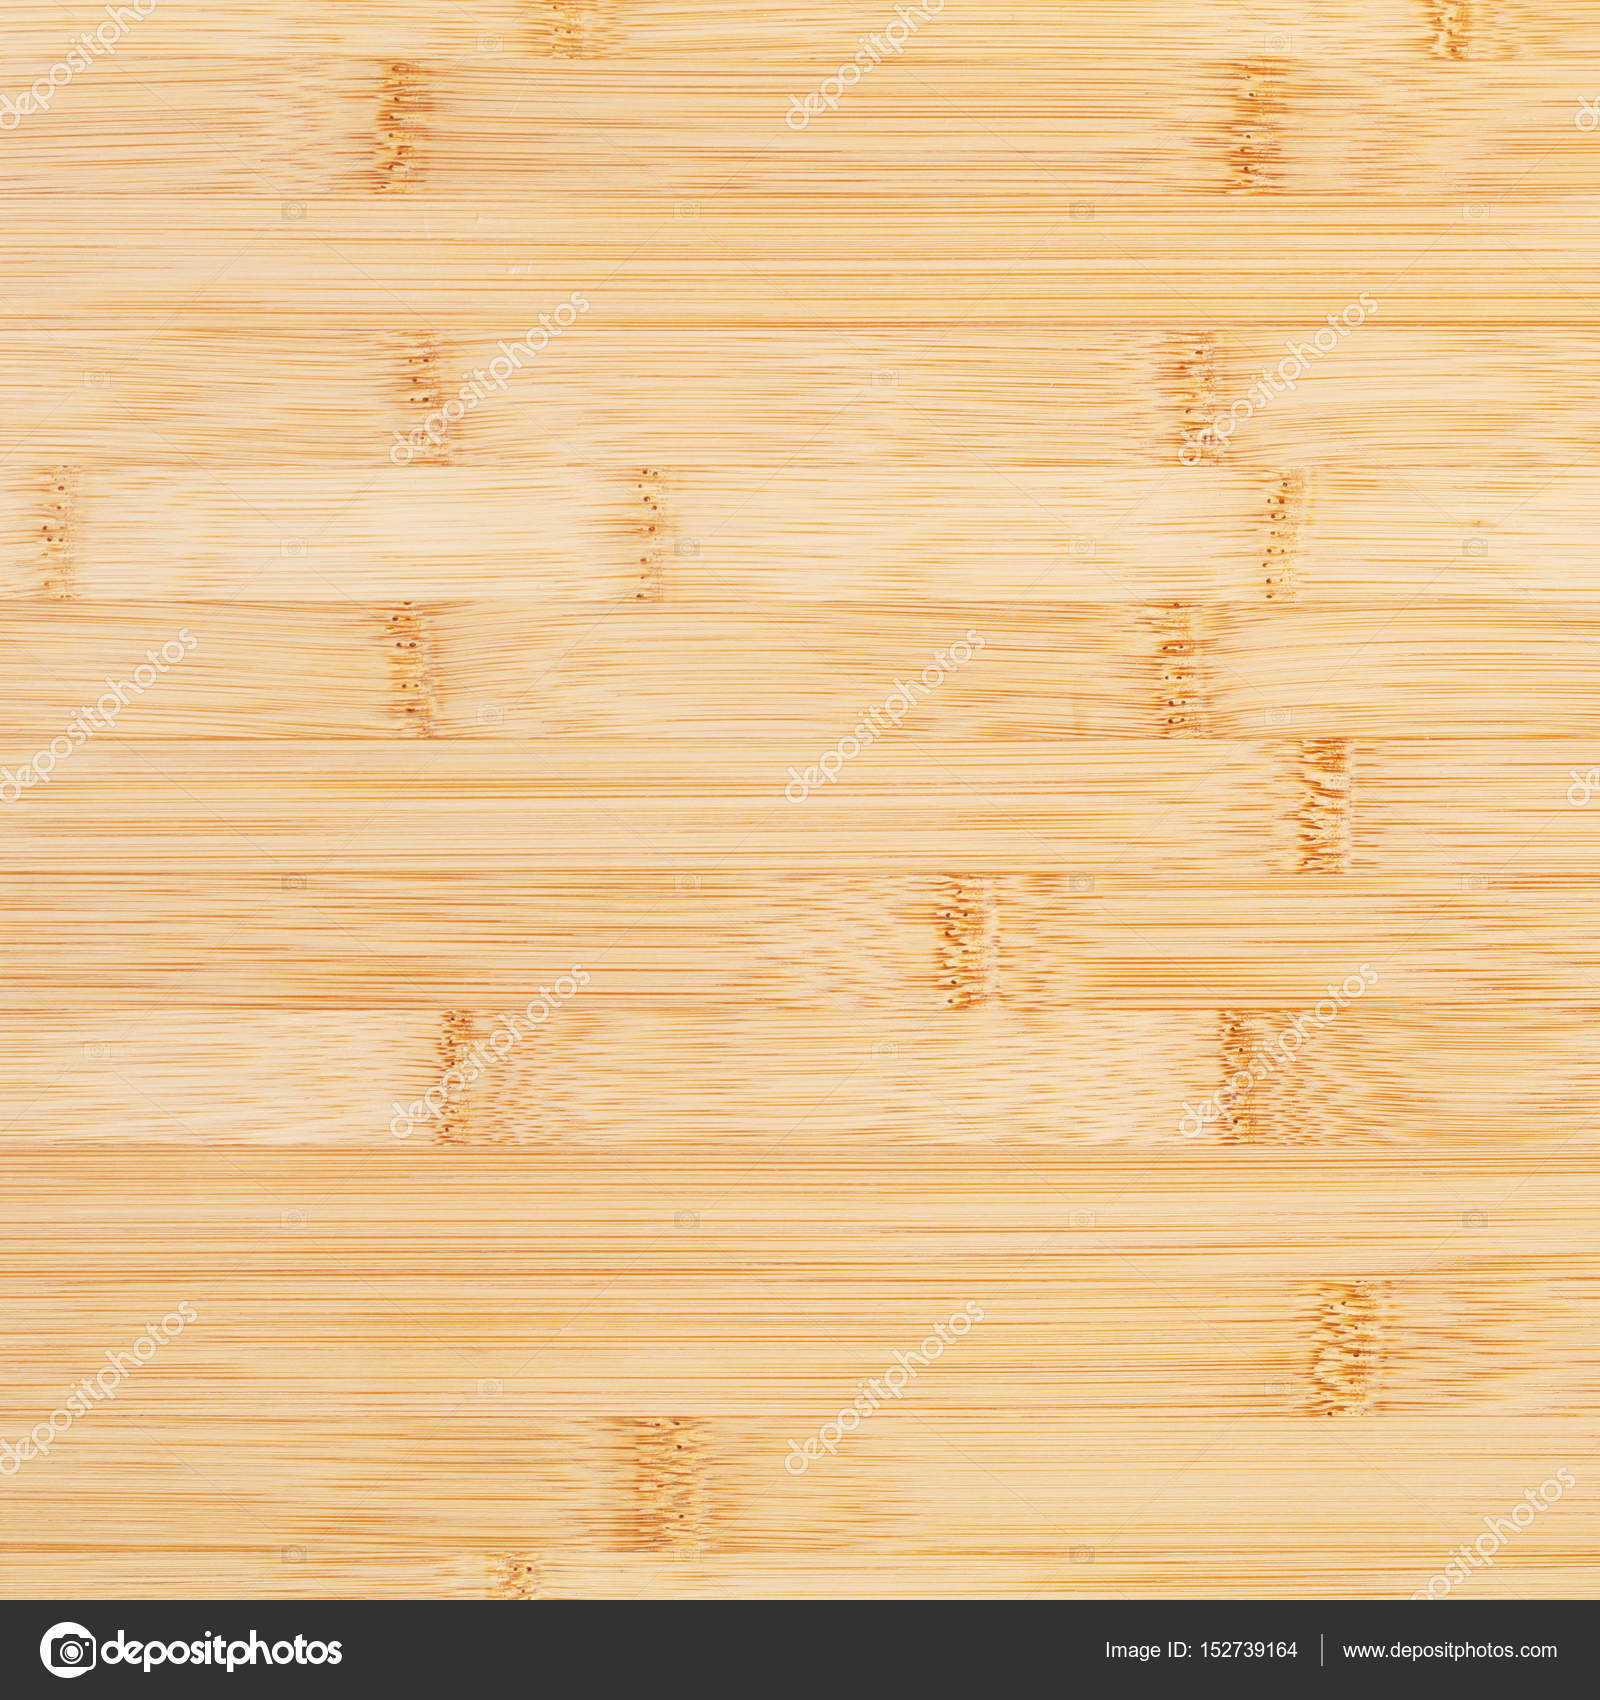 Umiboo Bamboo Stove Topper And Cutting Board (large) : Target